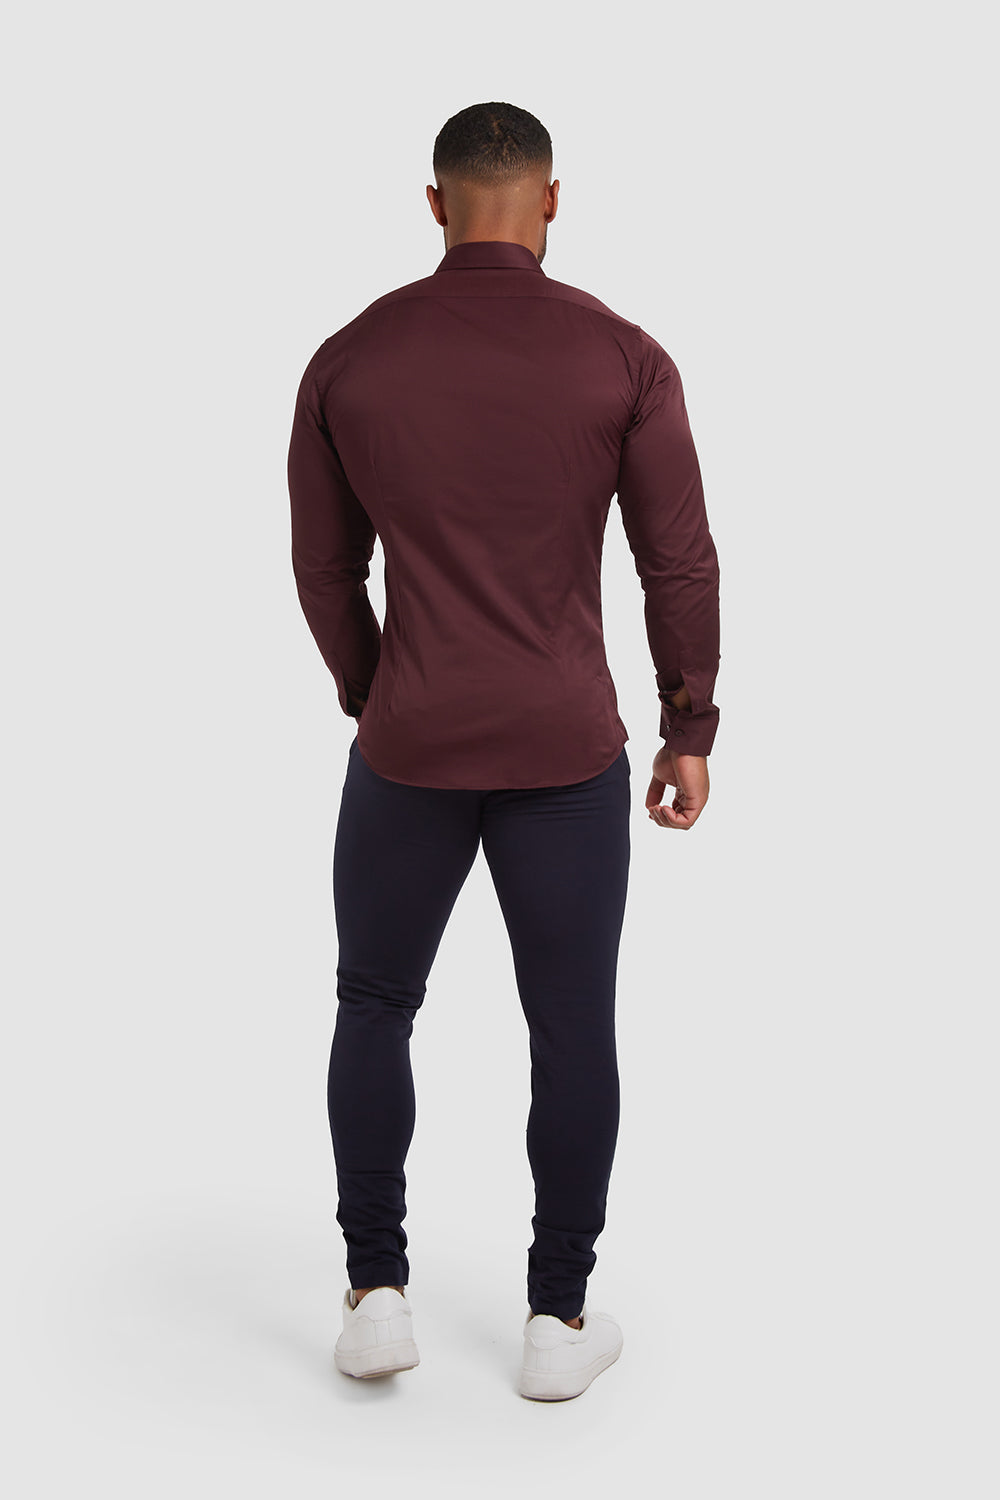 in Fit Muscle Shirt TAILORED ATHLETE USA Burgundy - - Signature 2.0